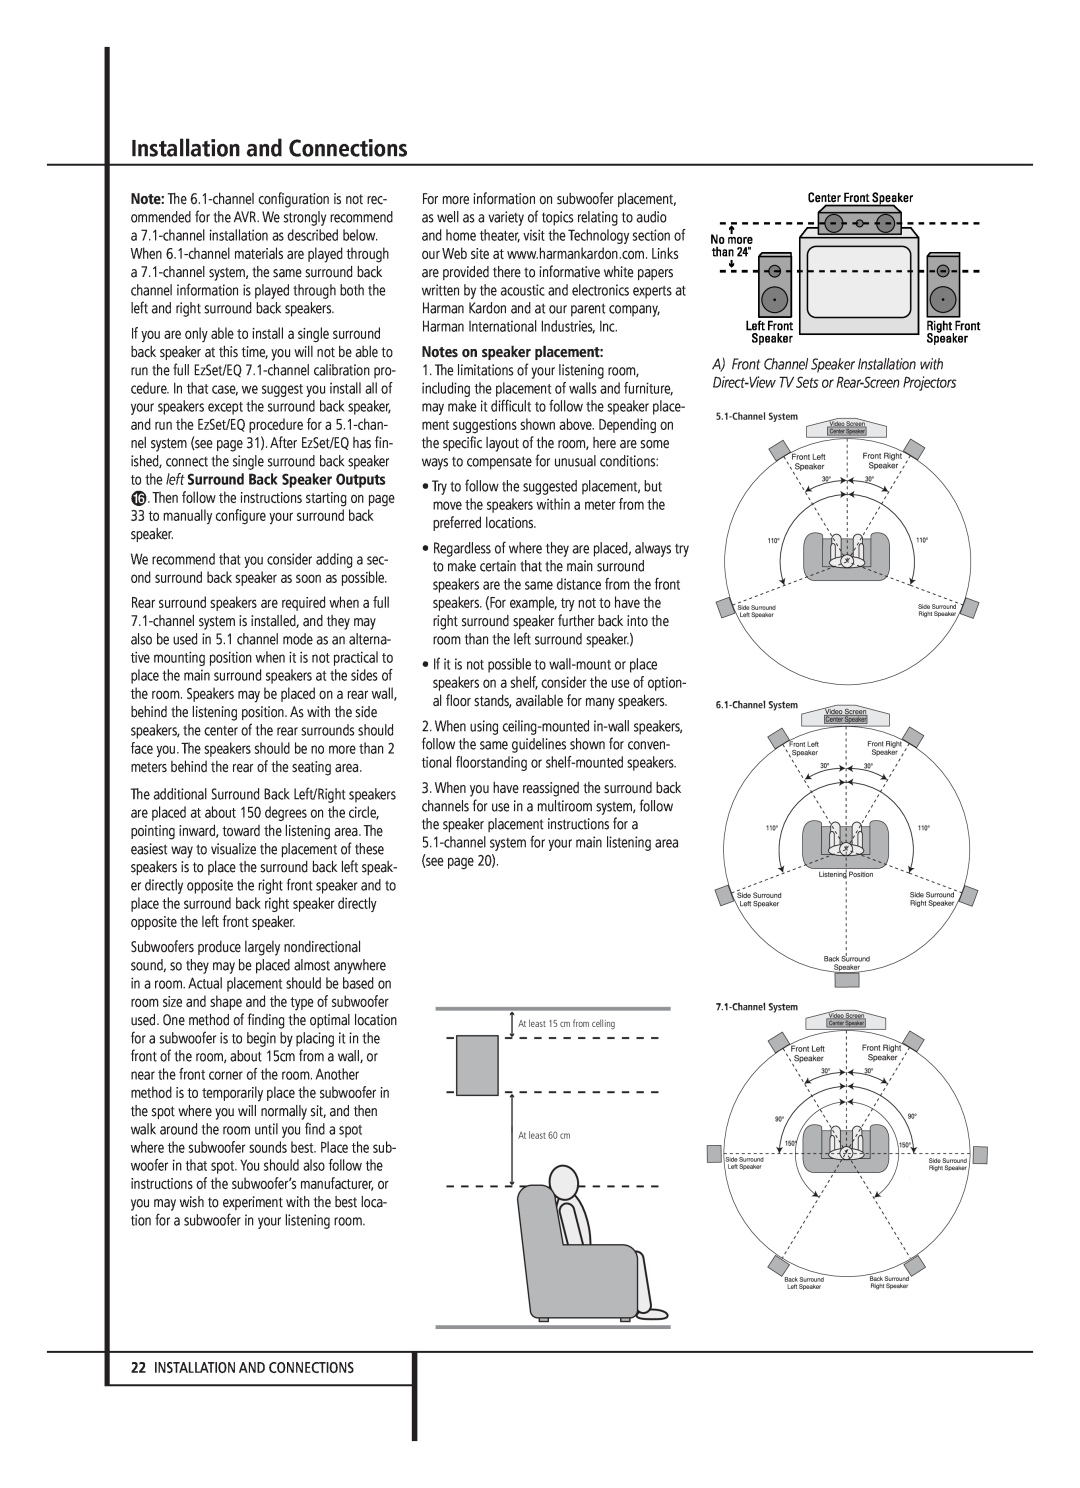 Harman-Kardon AVR 645 owner manual Notes on speaker placement, Installation and Connections 